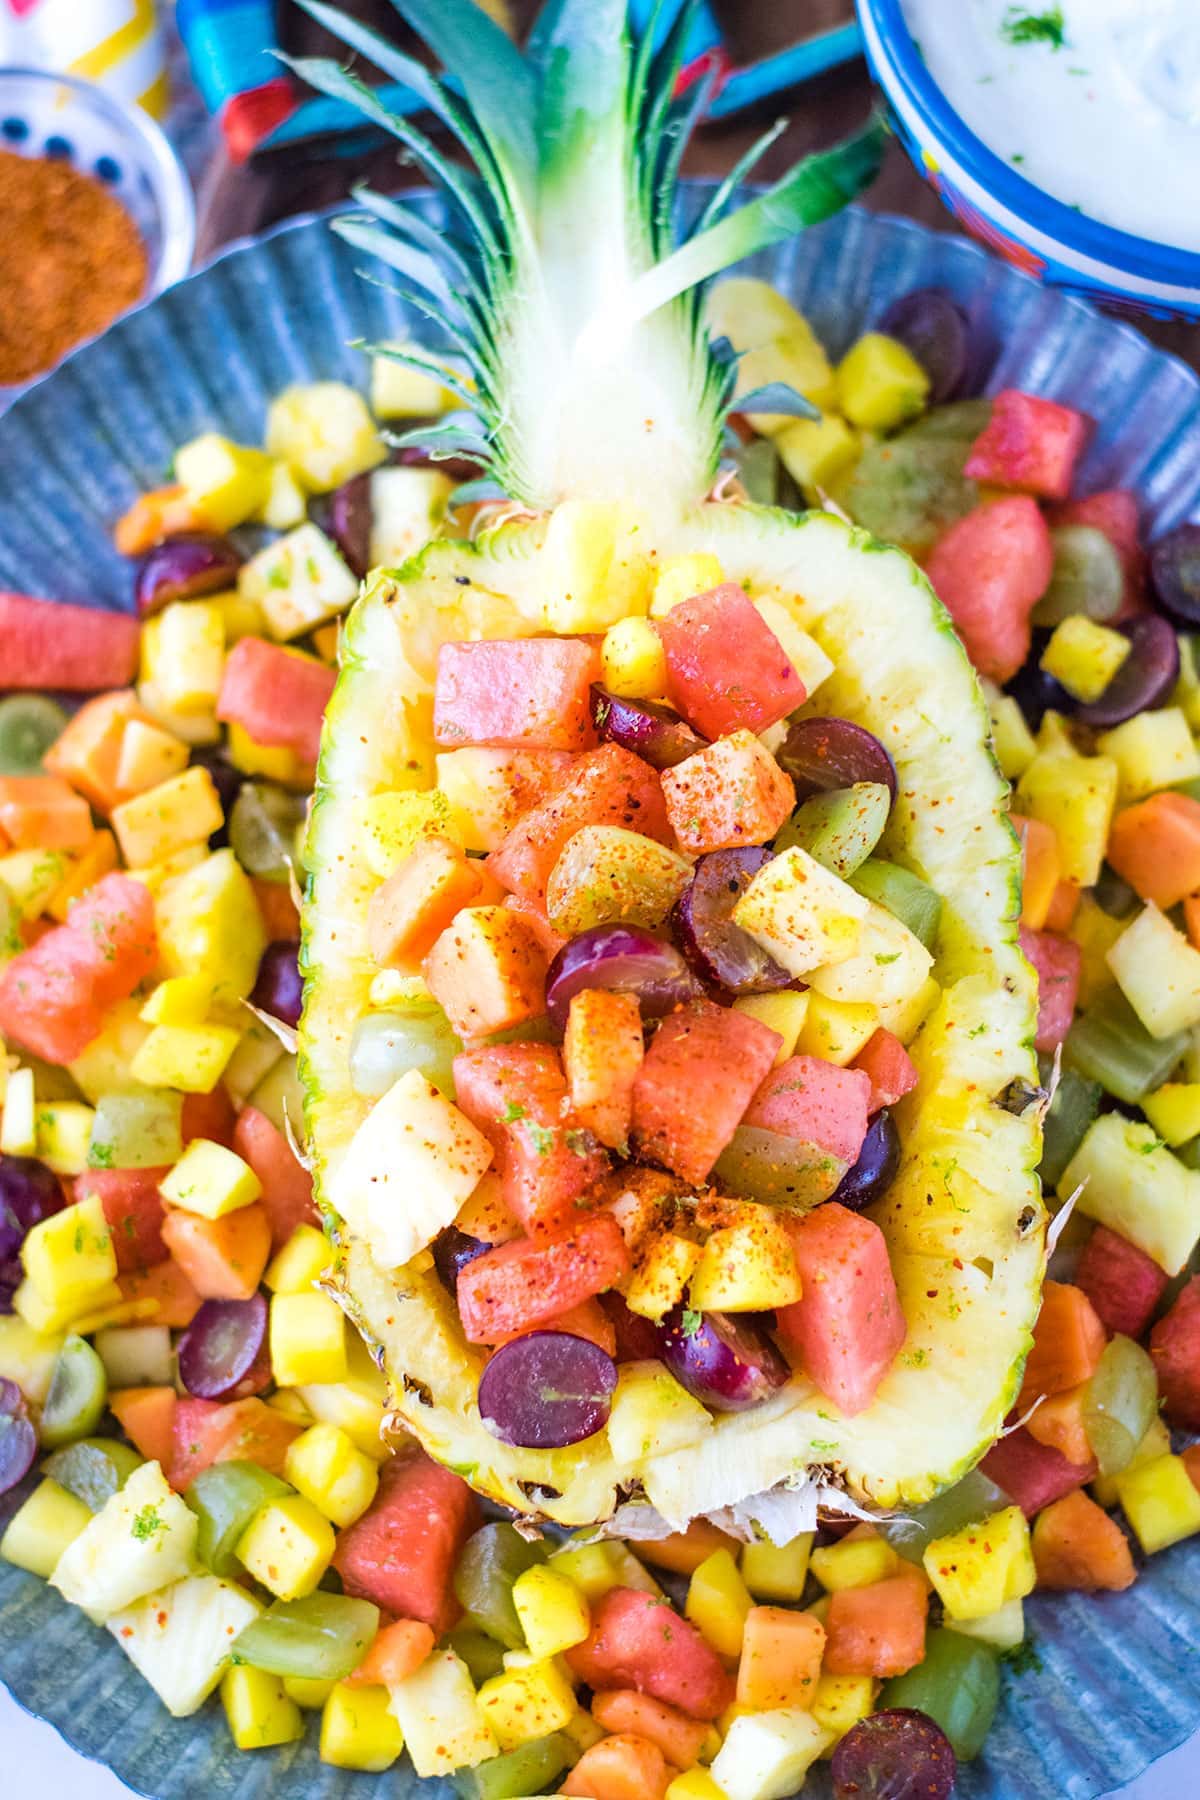 Half pineapple with Mexican fruit salad sprinkled with chili lime seasoning on top.